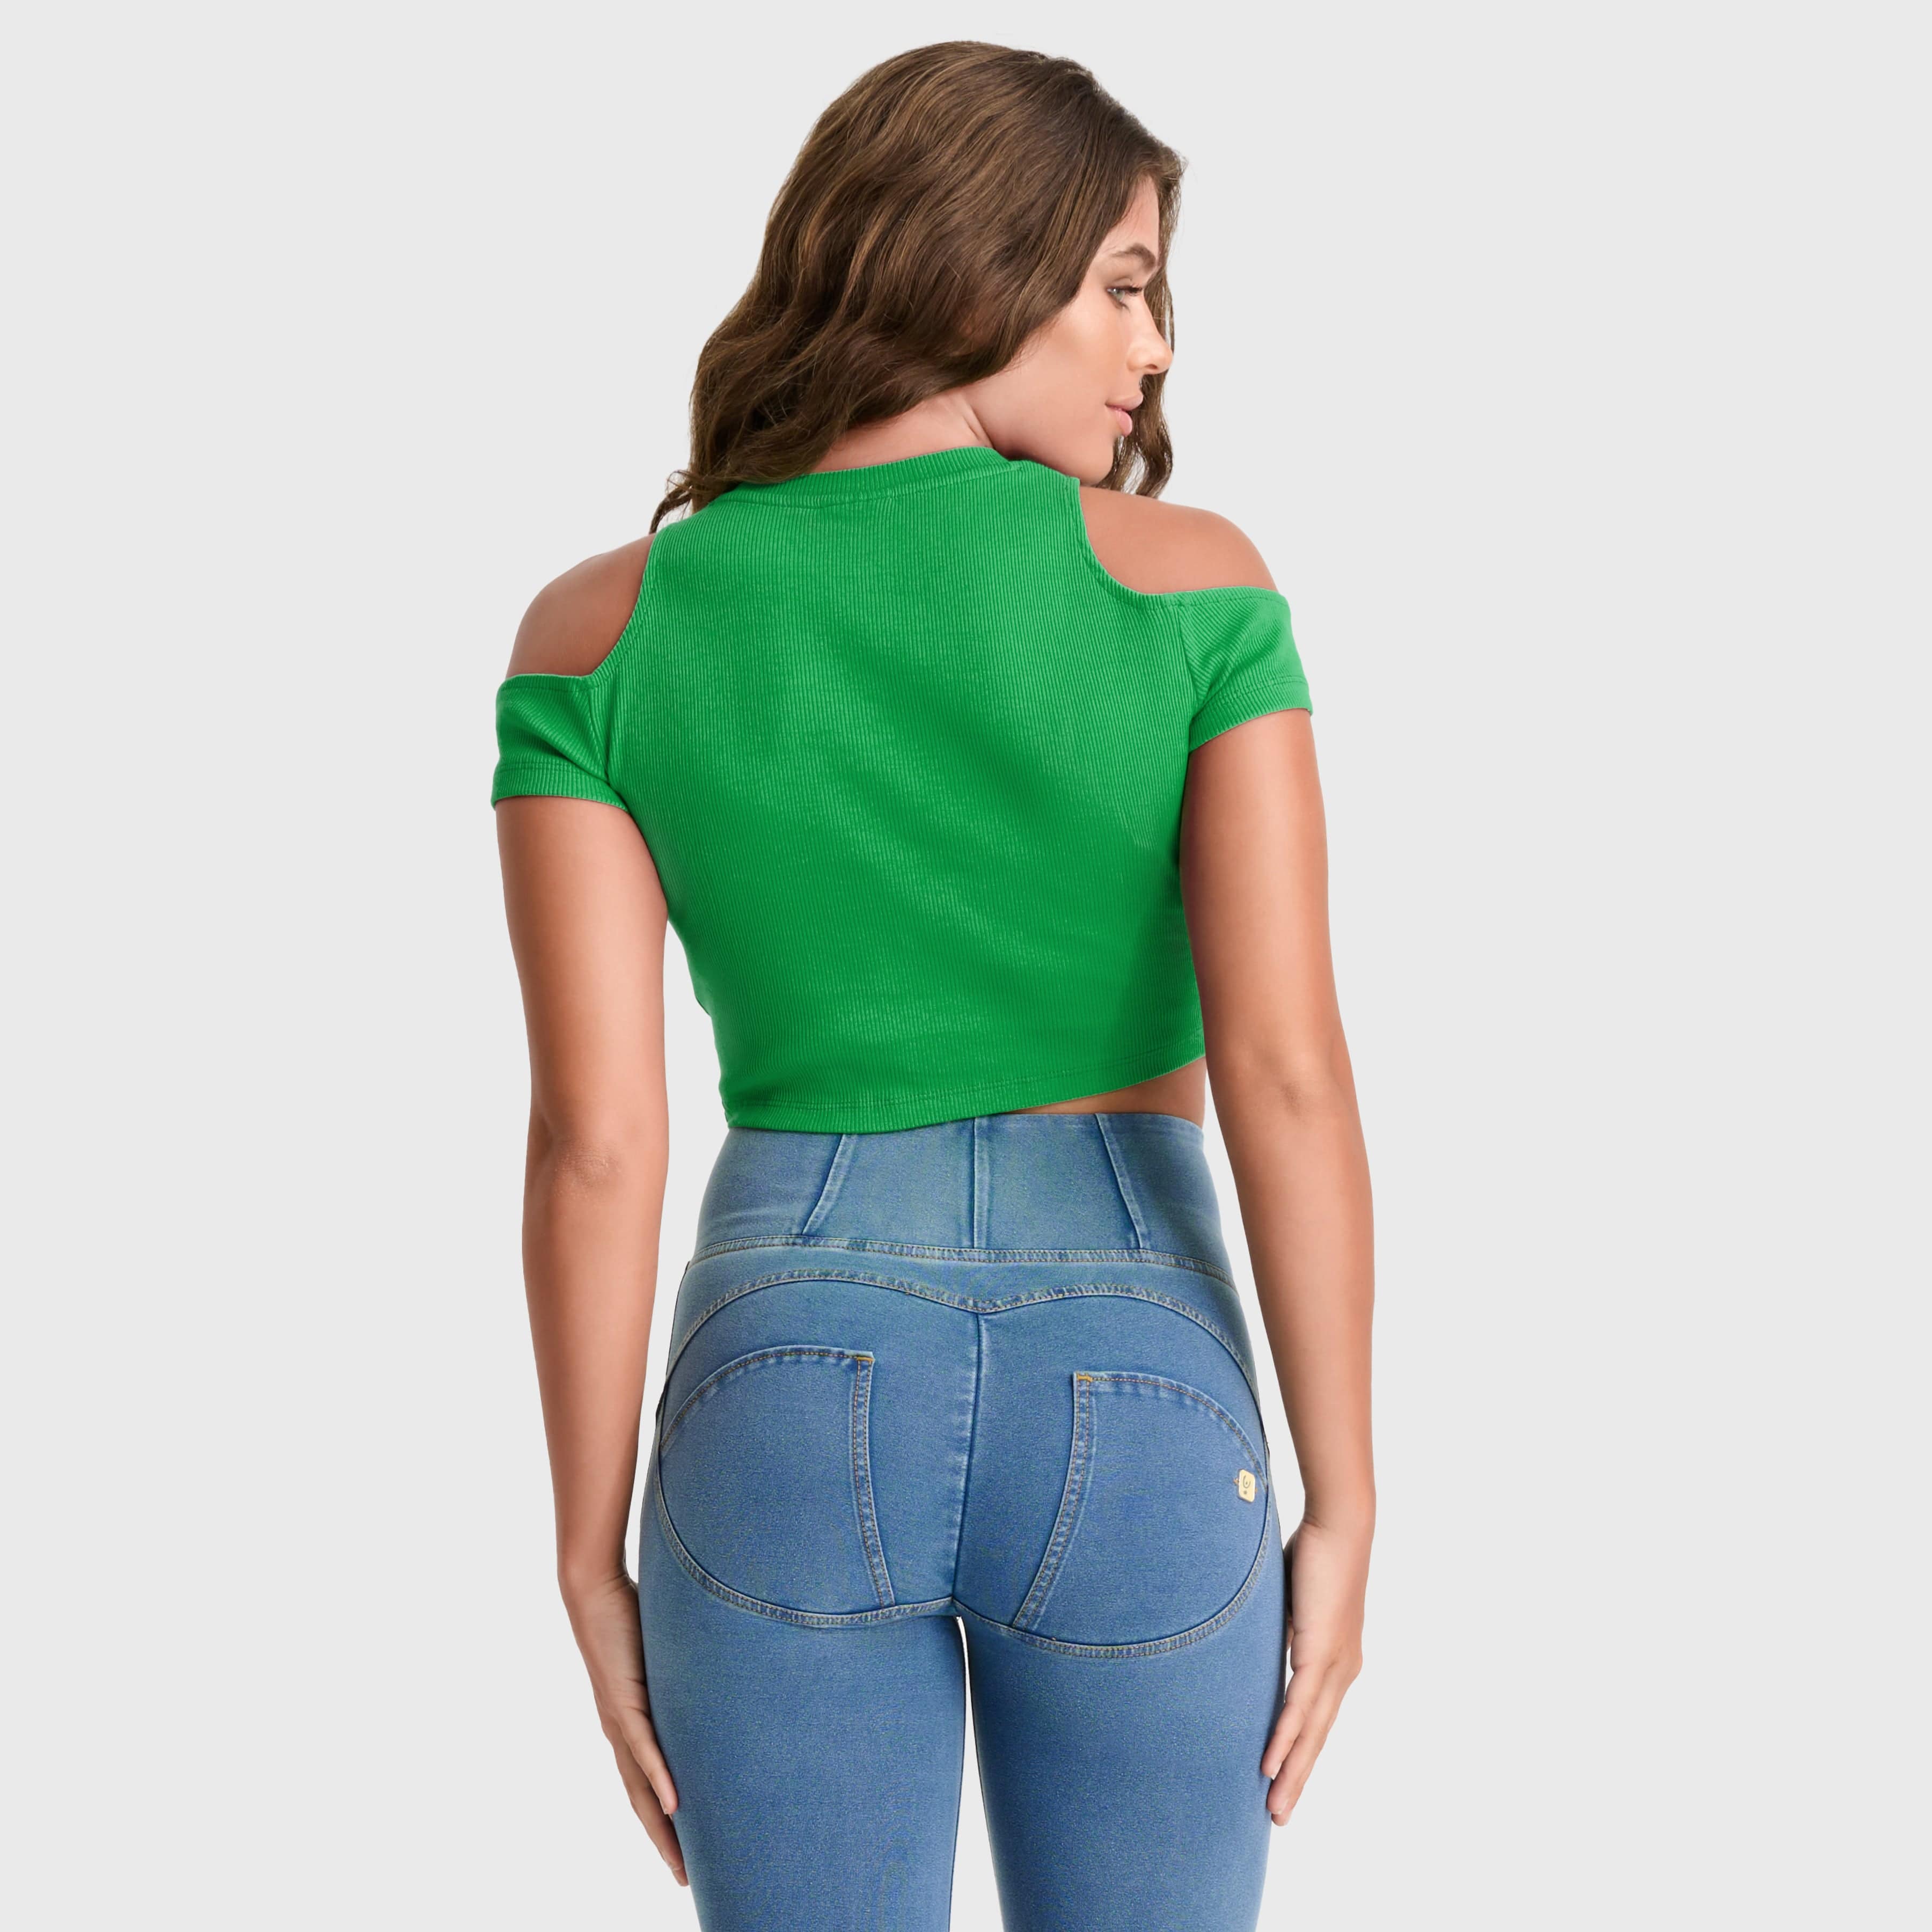 Cropped Cut Out T Shirt - Green 3